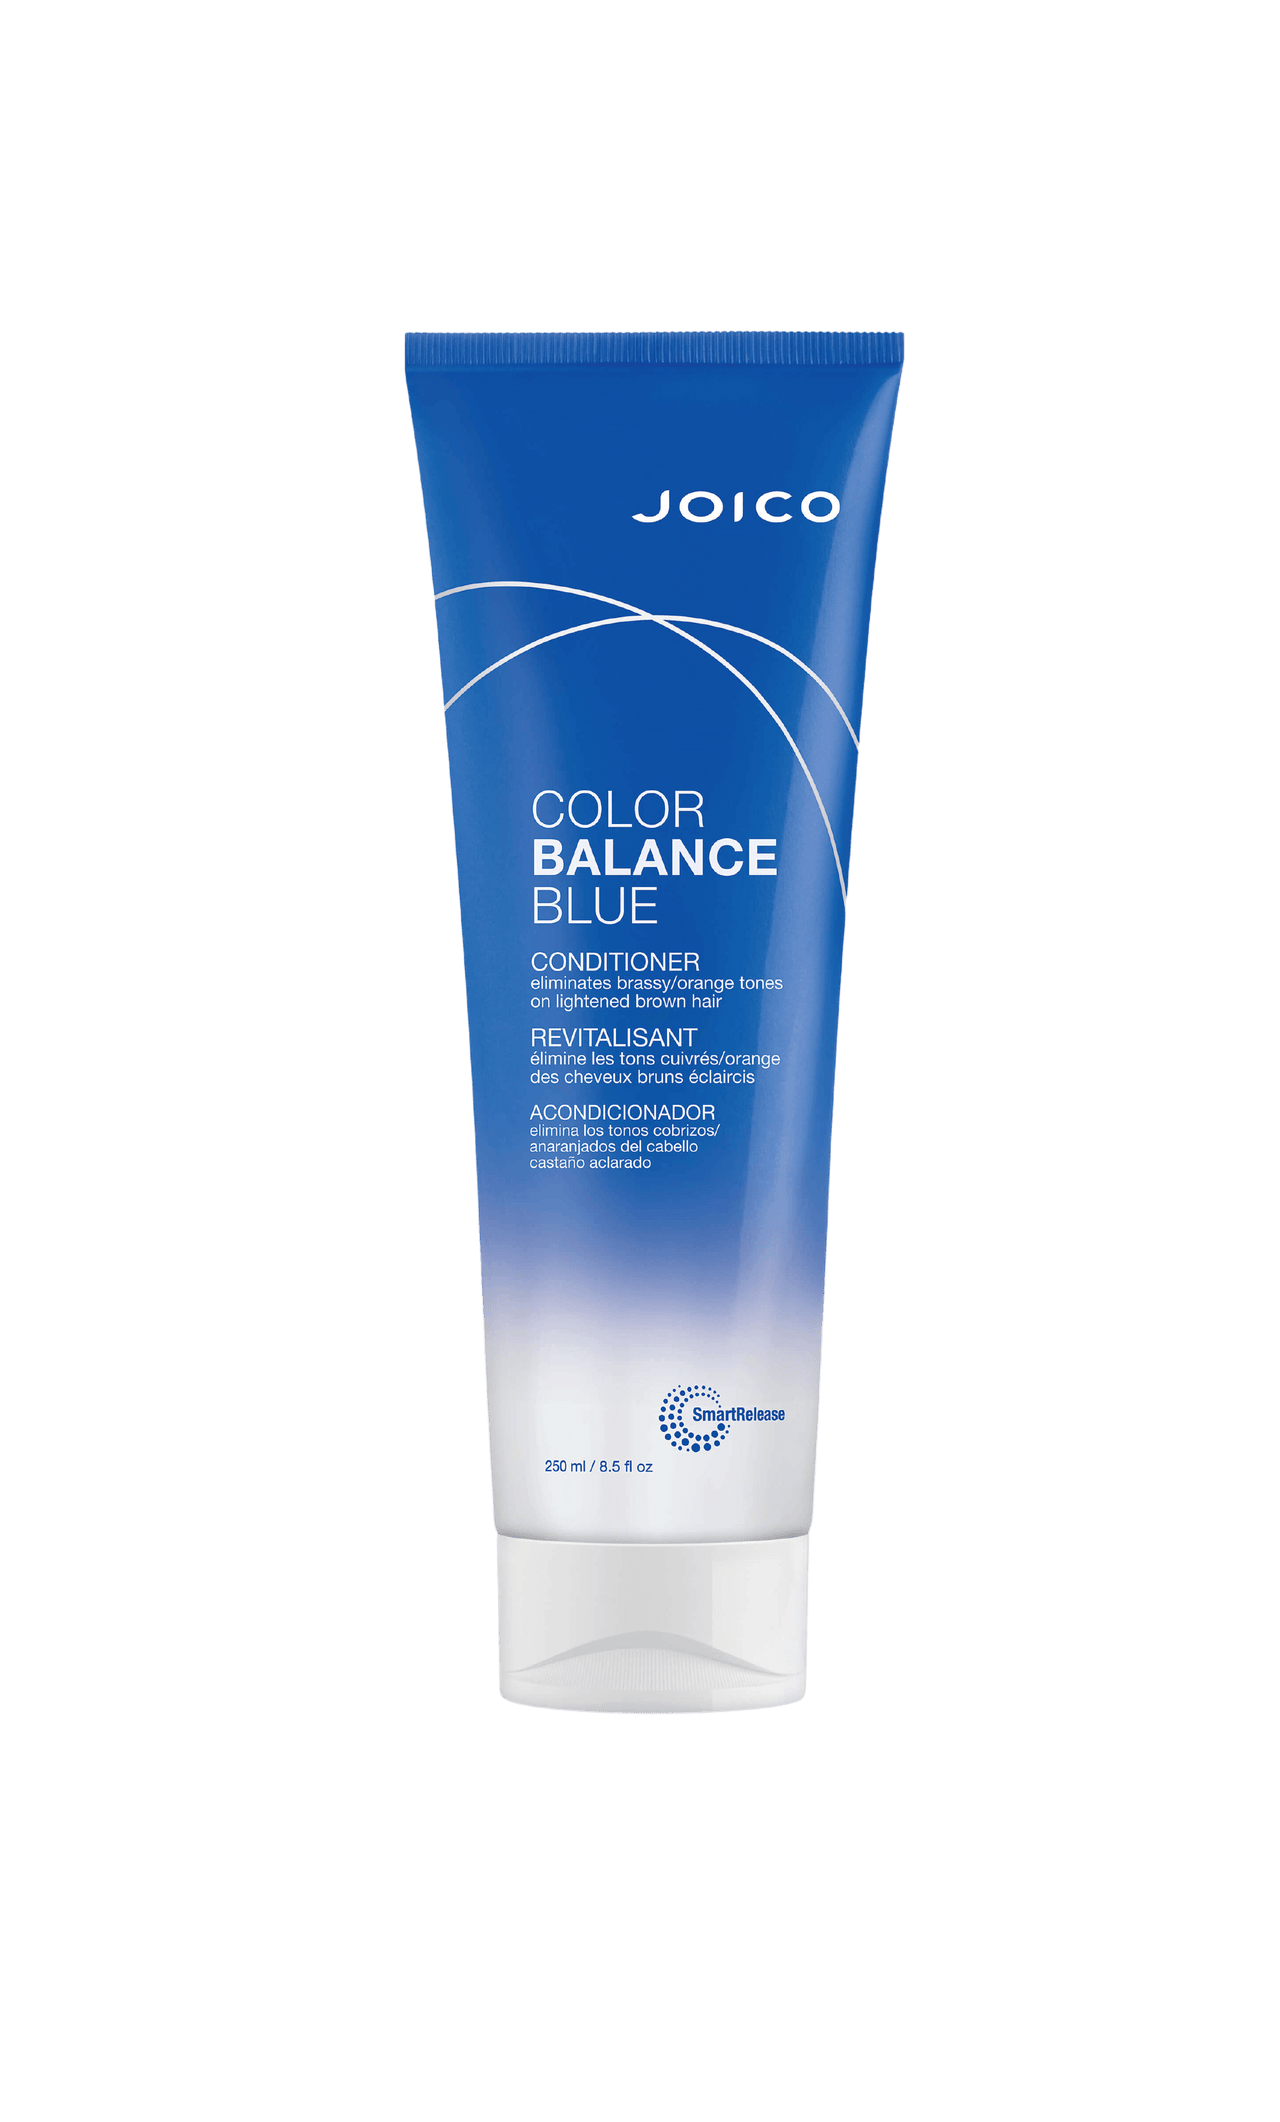 Joico Color Balance Blue Conditioner 250mL Tube